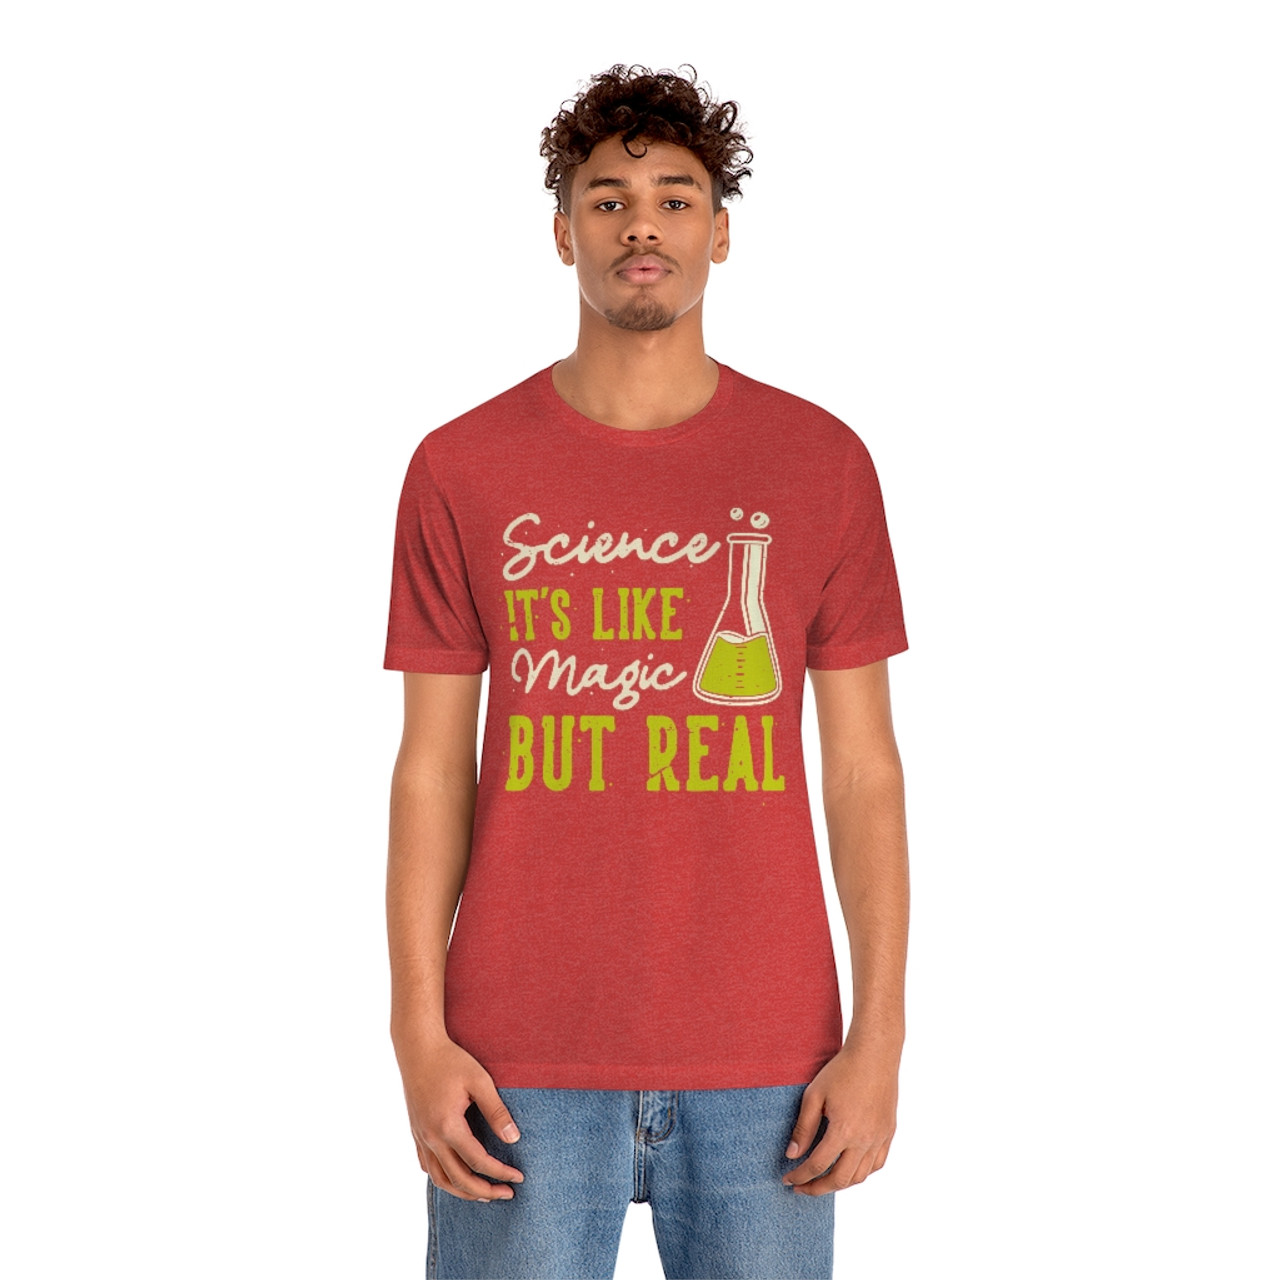 "Science It's Like Magic But Real" T-Shirt